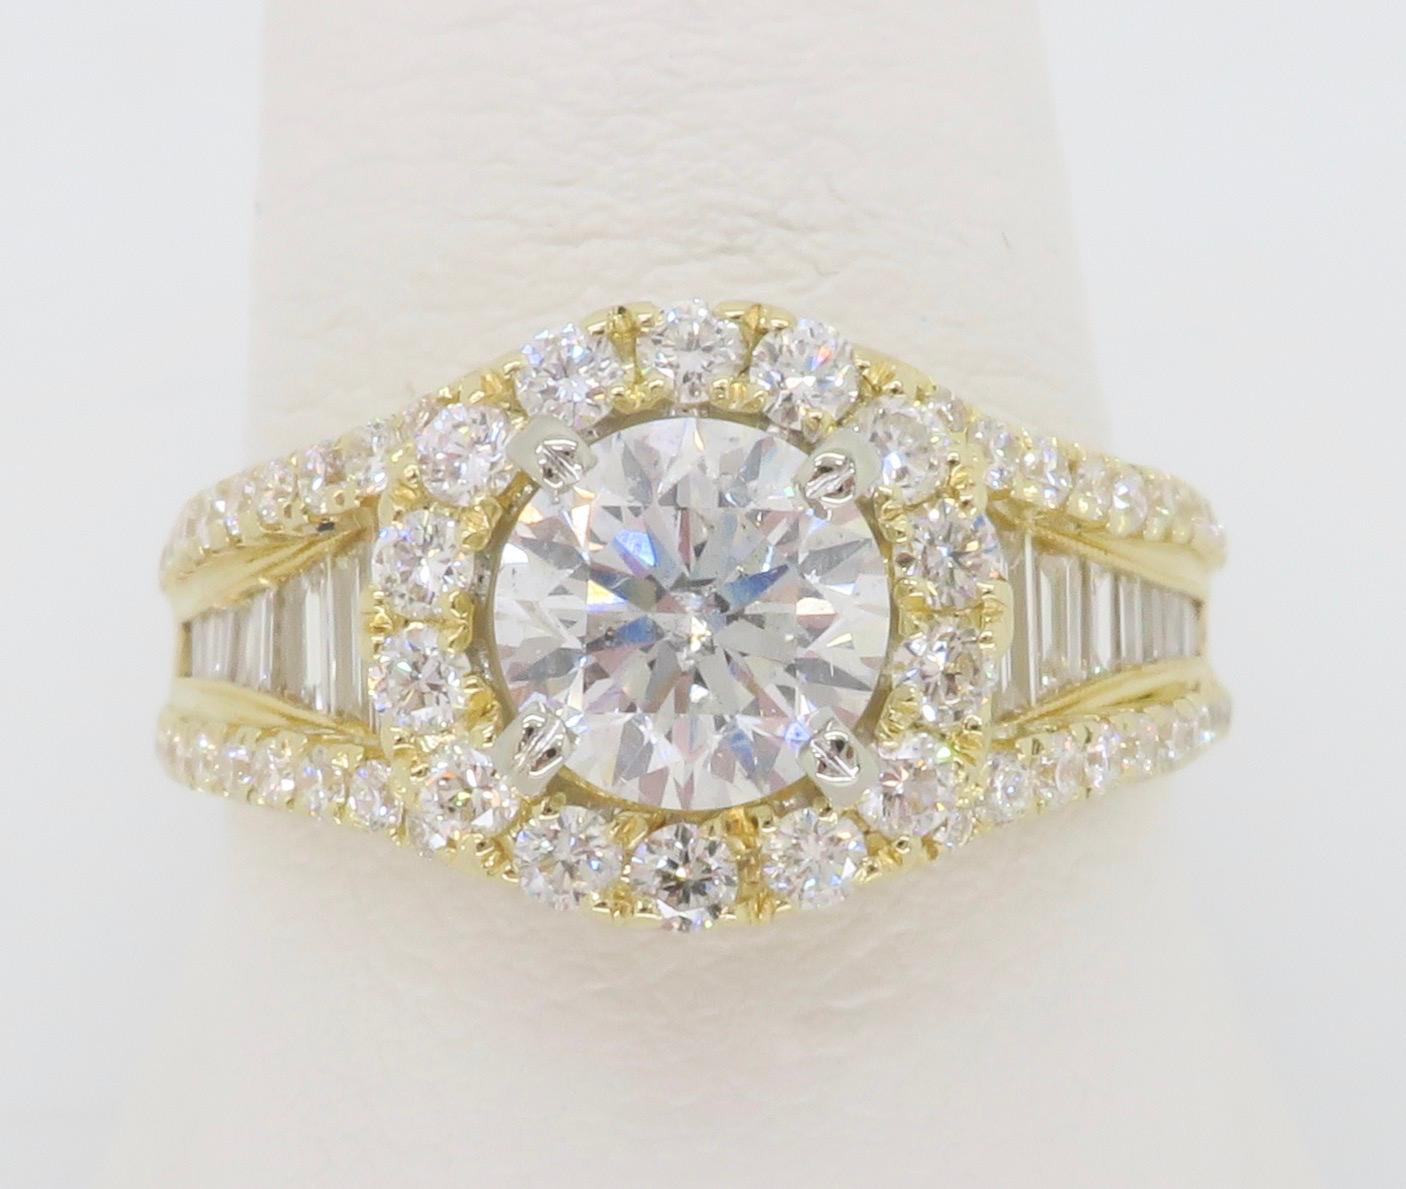 Stunning Diamond engagement ring featuring a Round Brilliant cut center stone flanked by a halo and baguette cut diamonds. 

Center Diamond Carat Weight: 1.04CT
Center Diamond Cut: Round Brilliant
Center Diamond Color: F
Center Diamond Clarity: